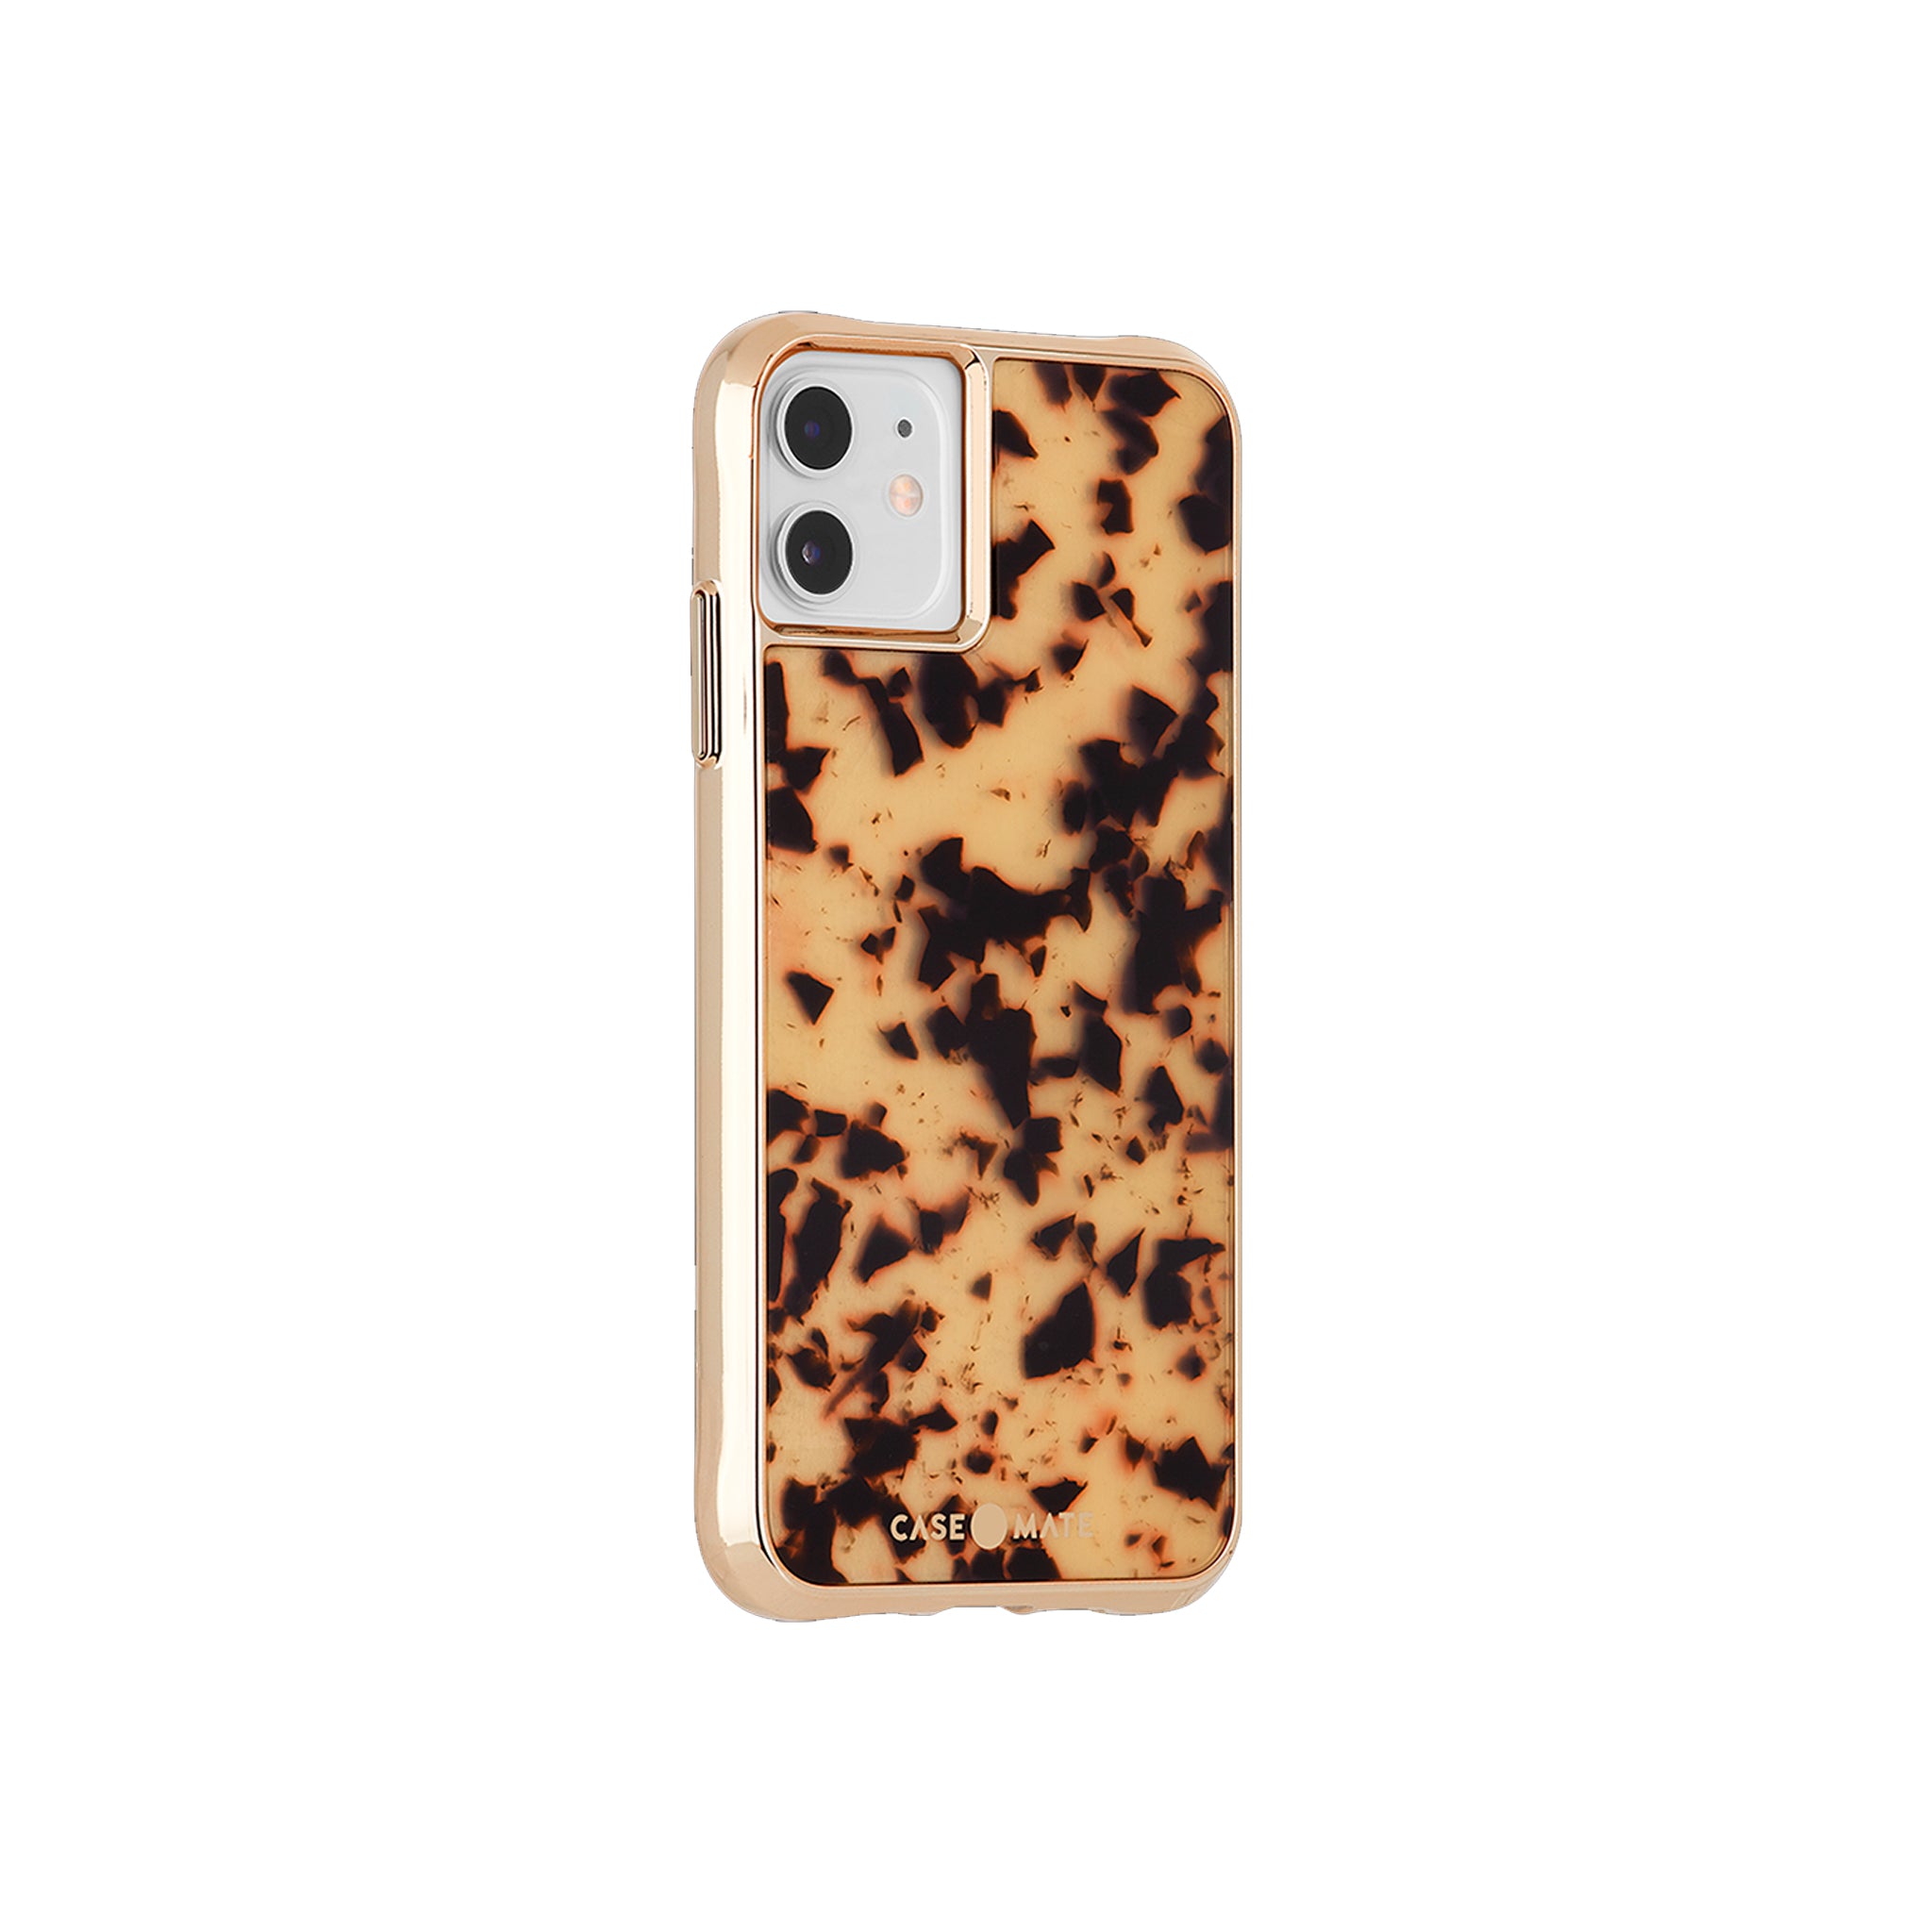 Case-mate - Acetate Case For Apple iPhone 11 / Xr - Tortise Shell